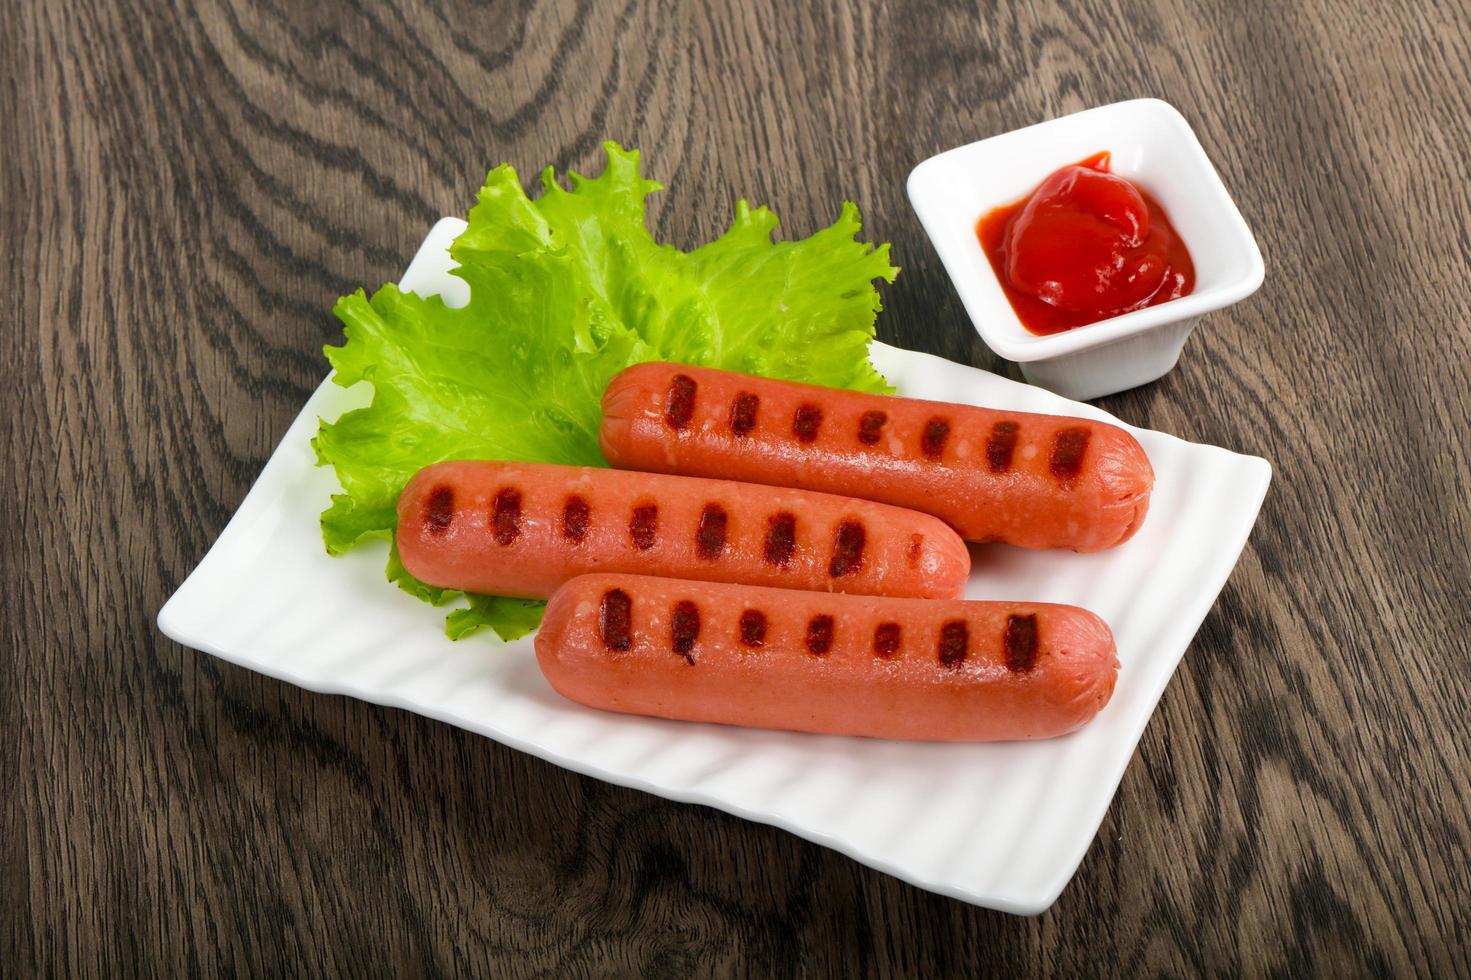 Grilled sausages on the plate and wooden background photo